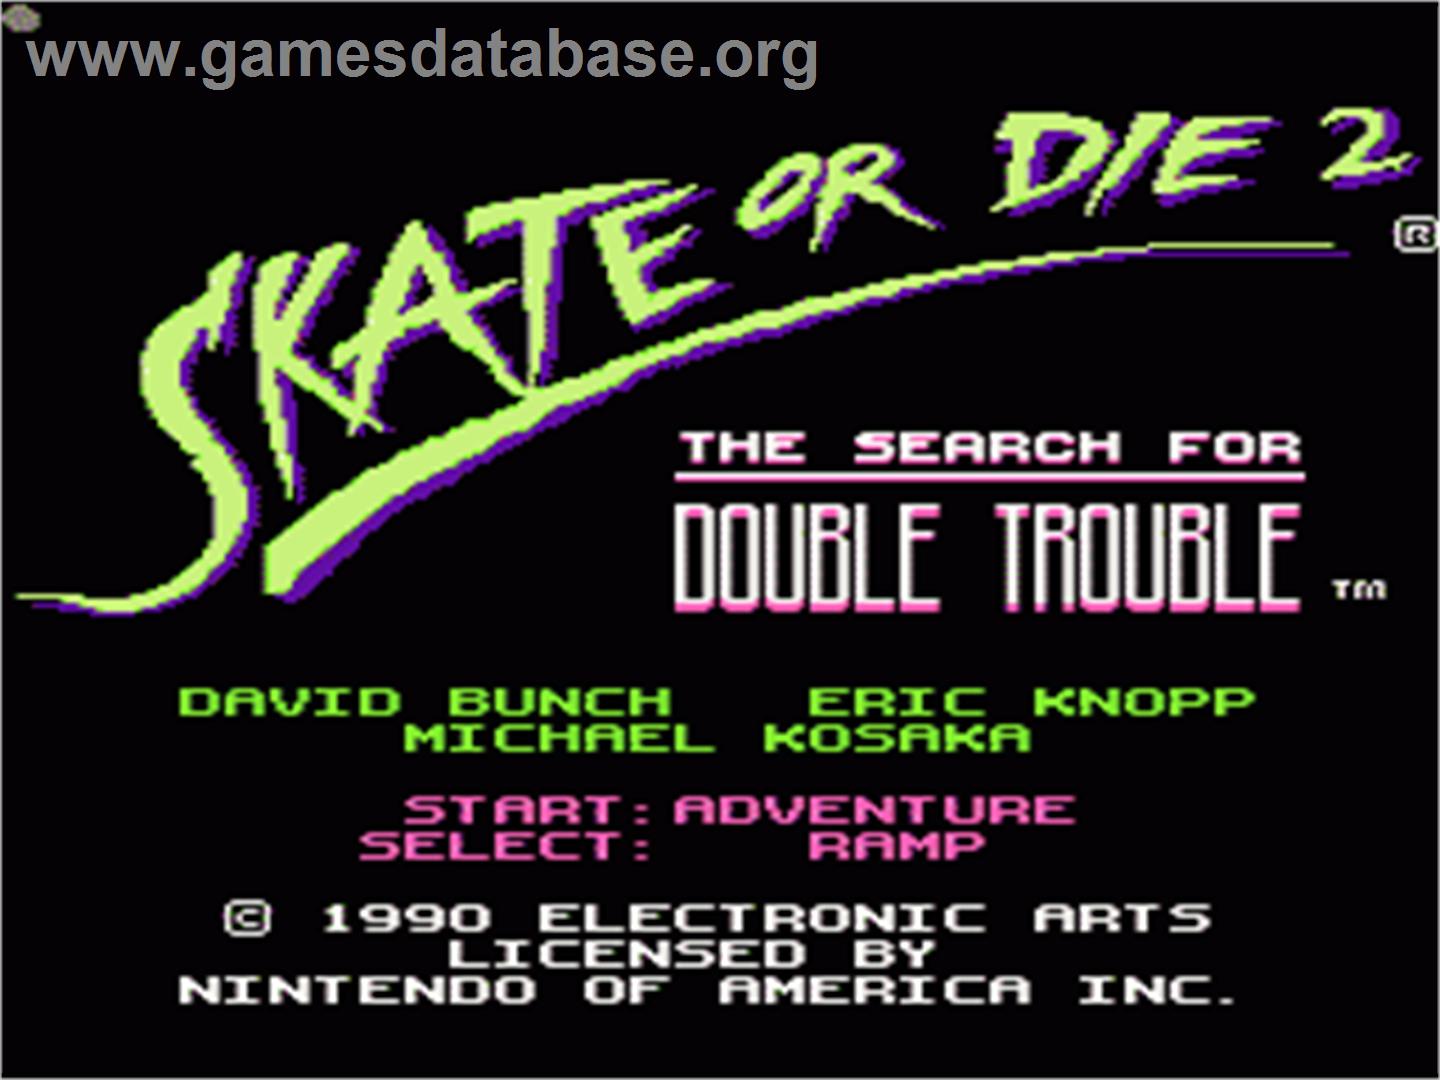 Skate or Die 2: The Search for Double Trouble - Nintendo NES - Artwork - Title Screen